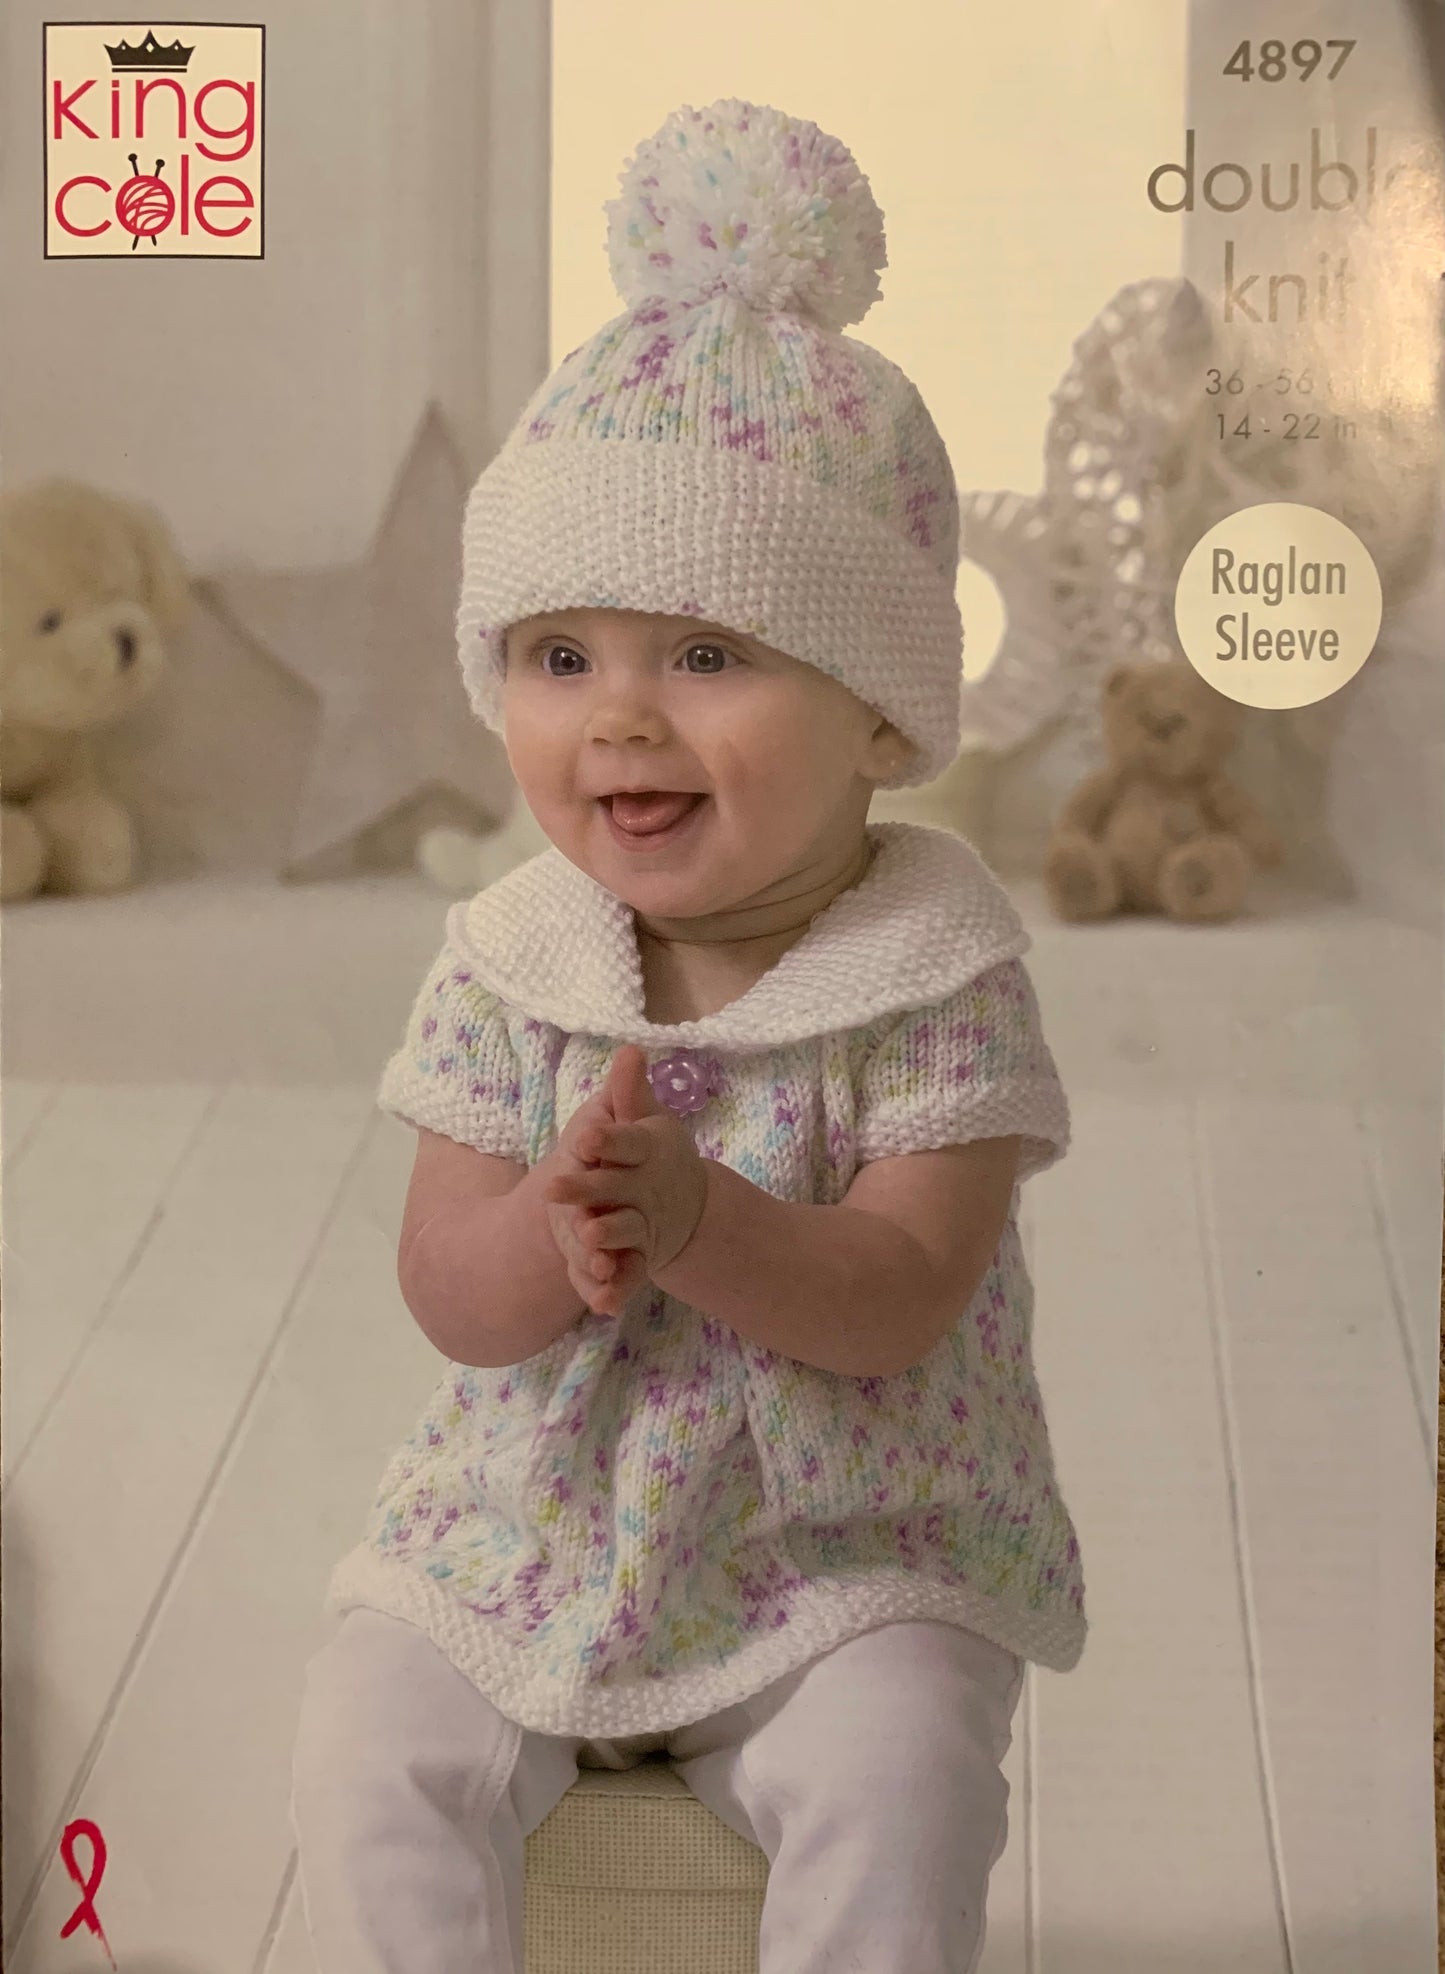 4897 King Cole double knit baby dress, hoodie, top, hat and leggings knitting pattern